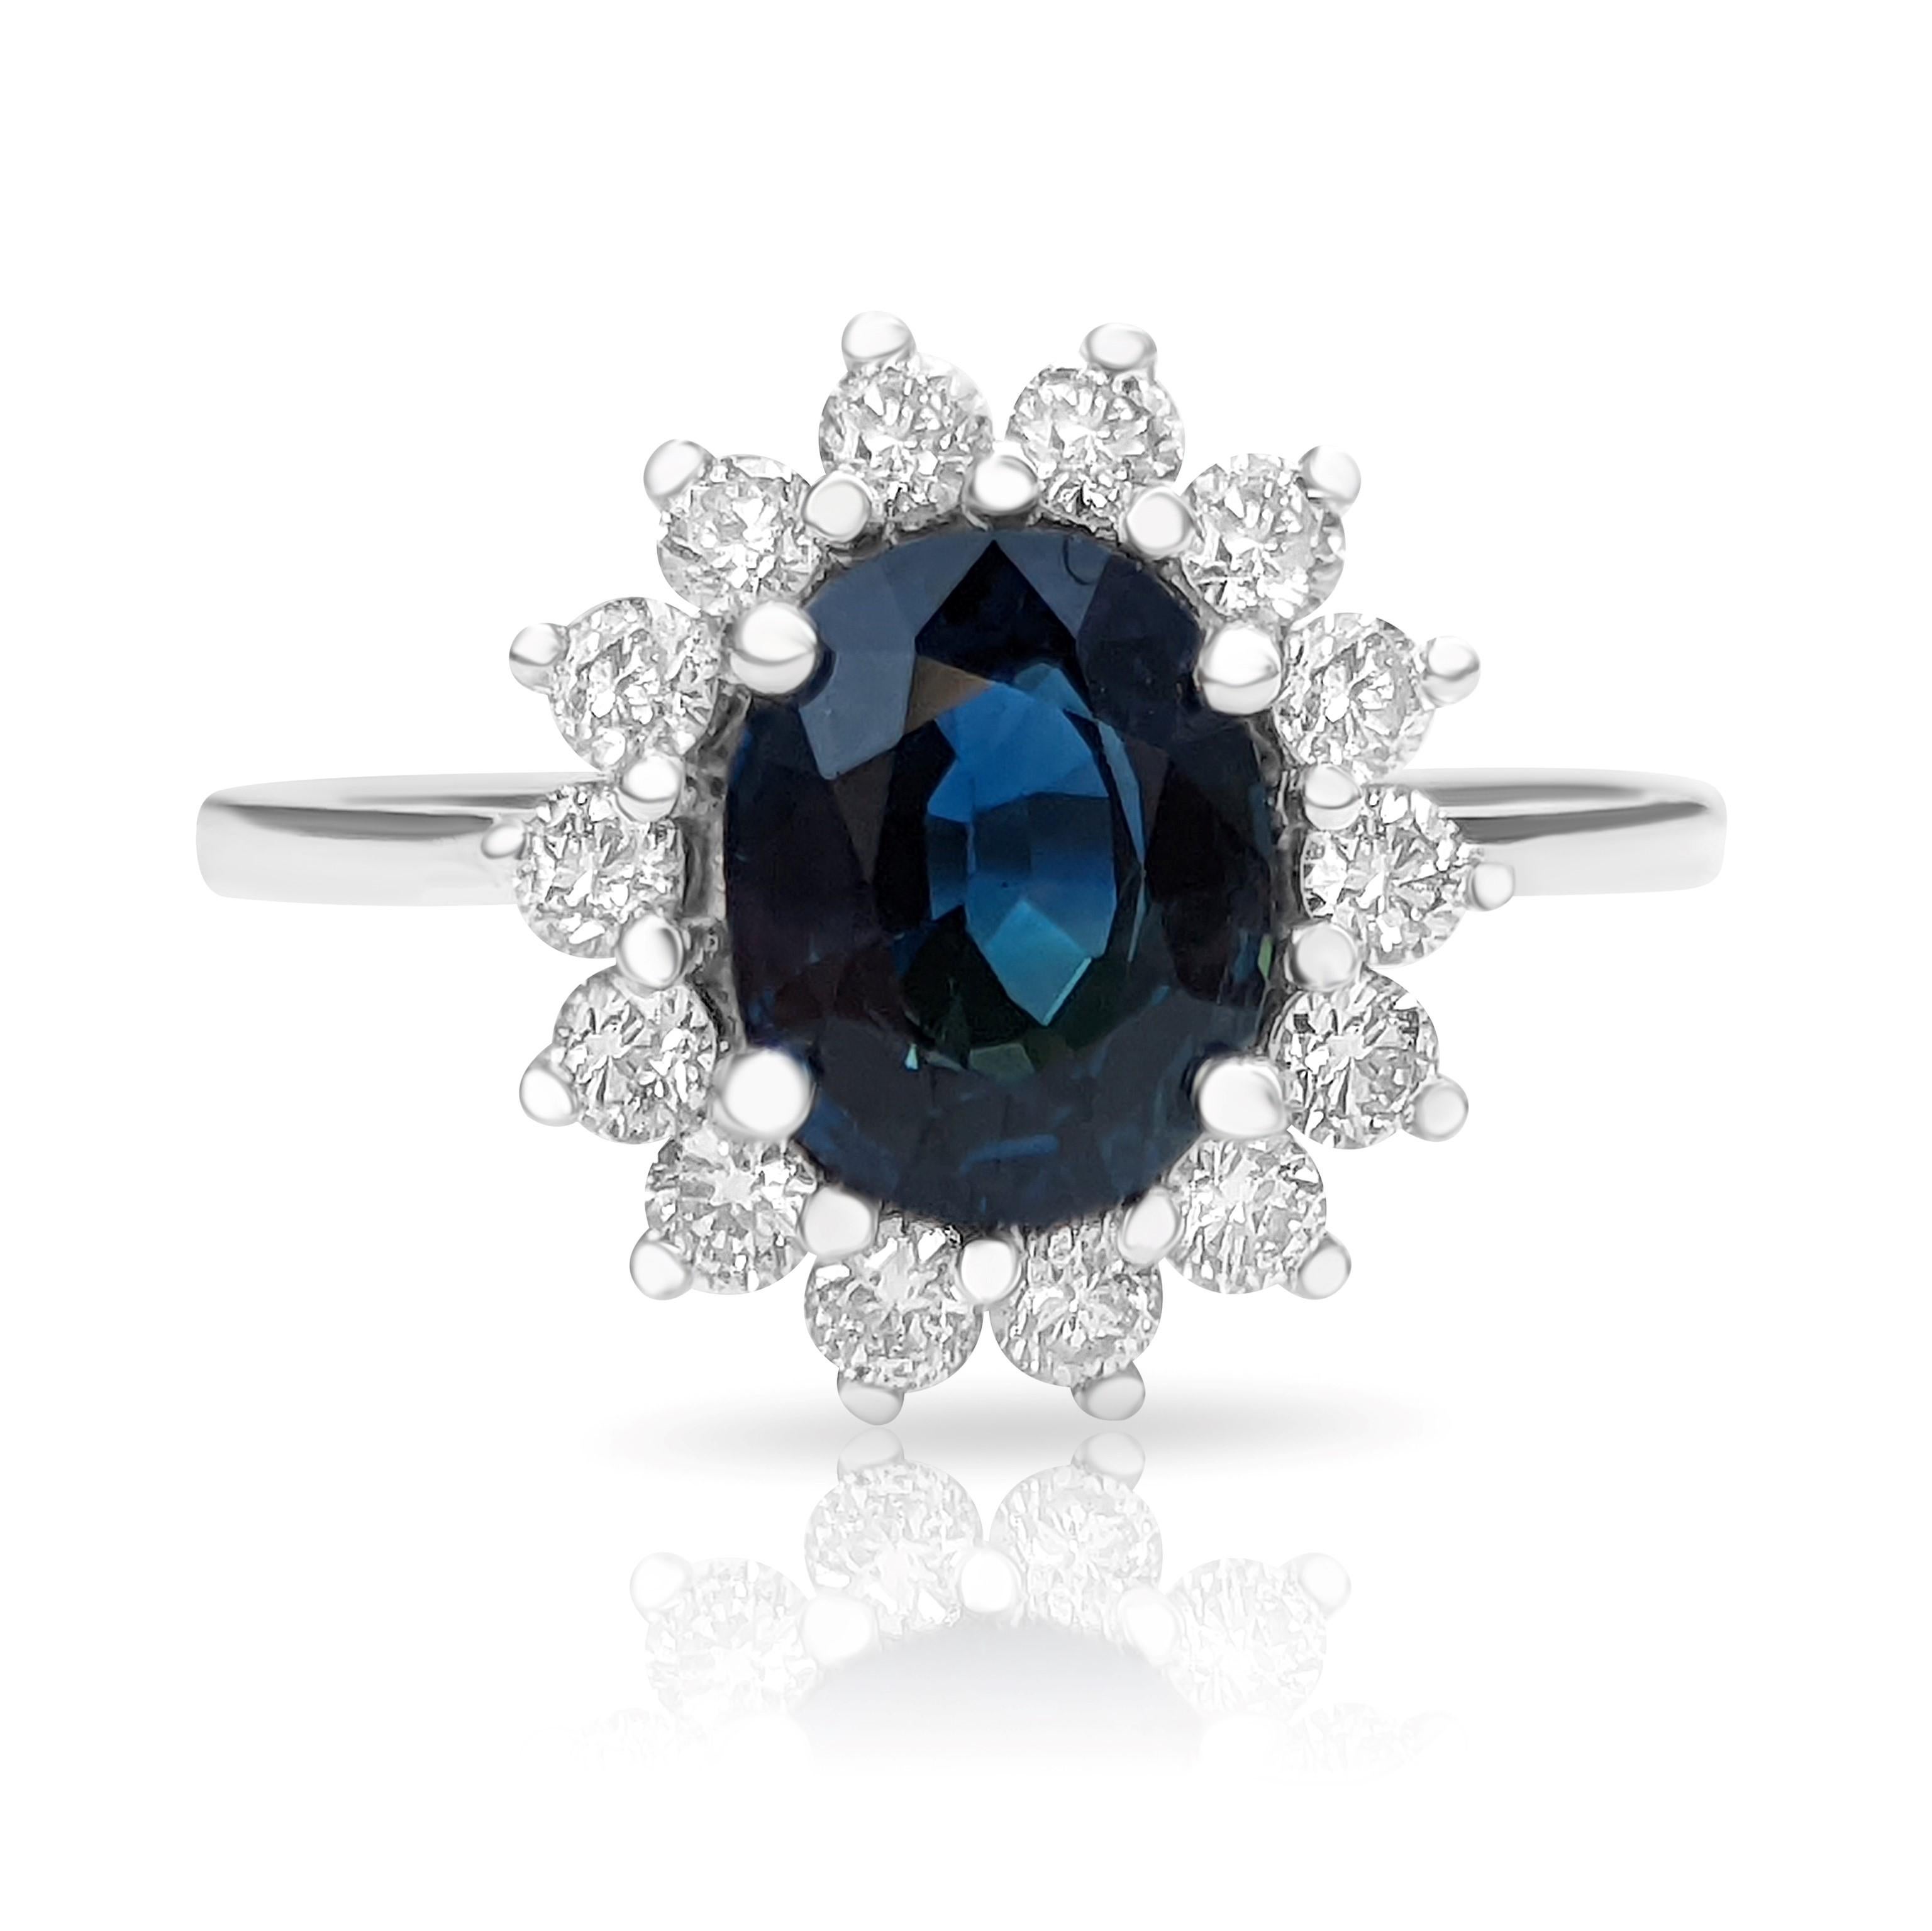 Women's 1.81 Carat Blue Sapphire and 0.50 Ct Diamonds, 14 Kt. White Gold, Ring